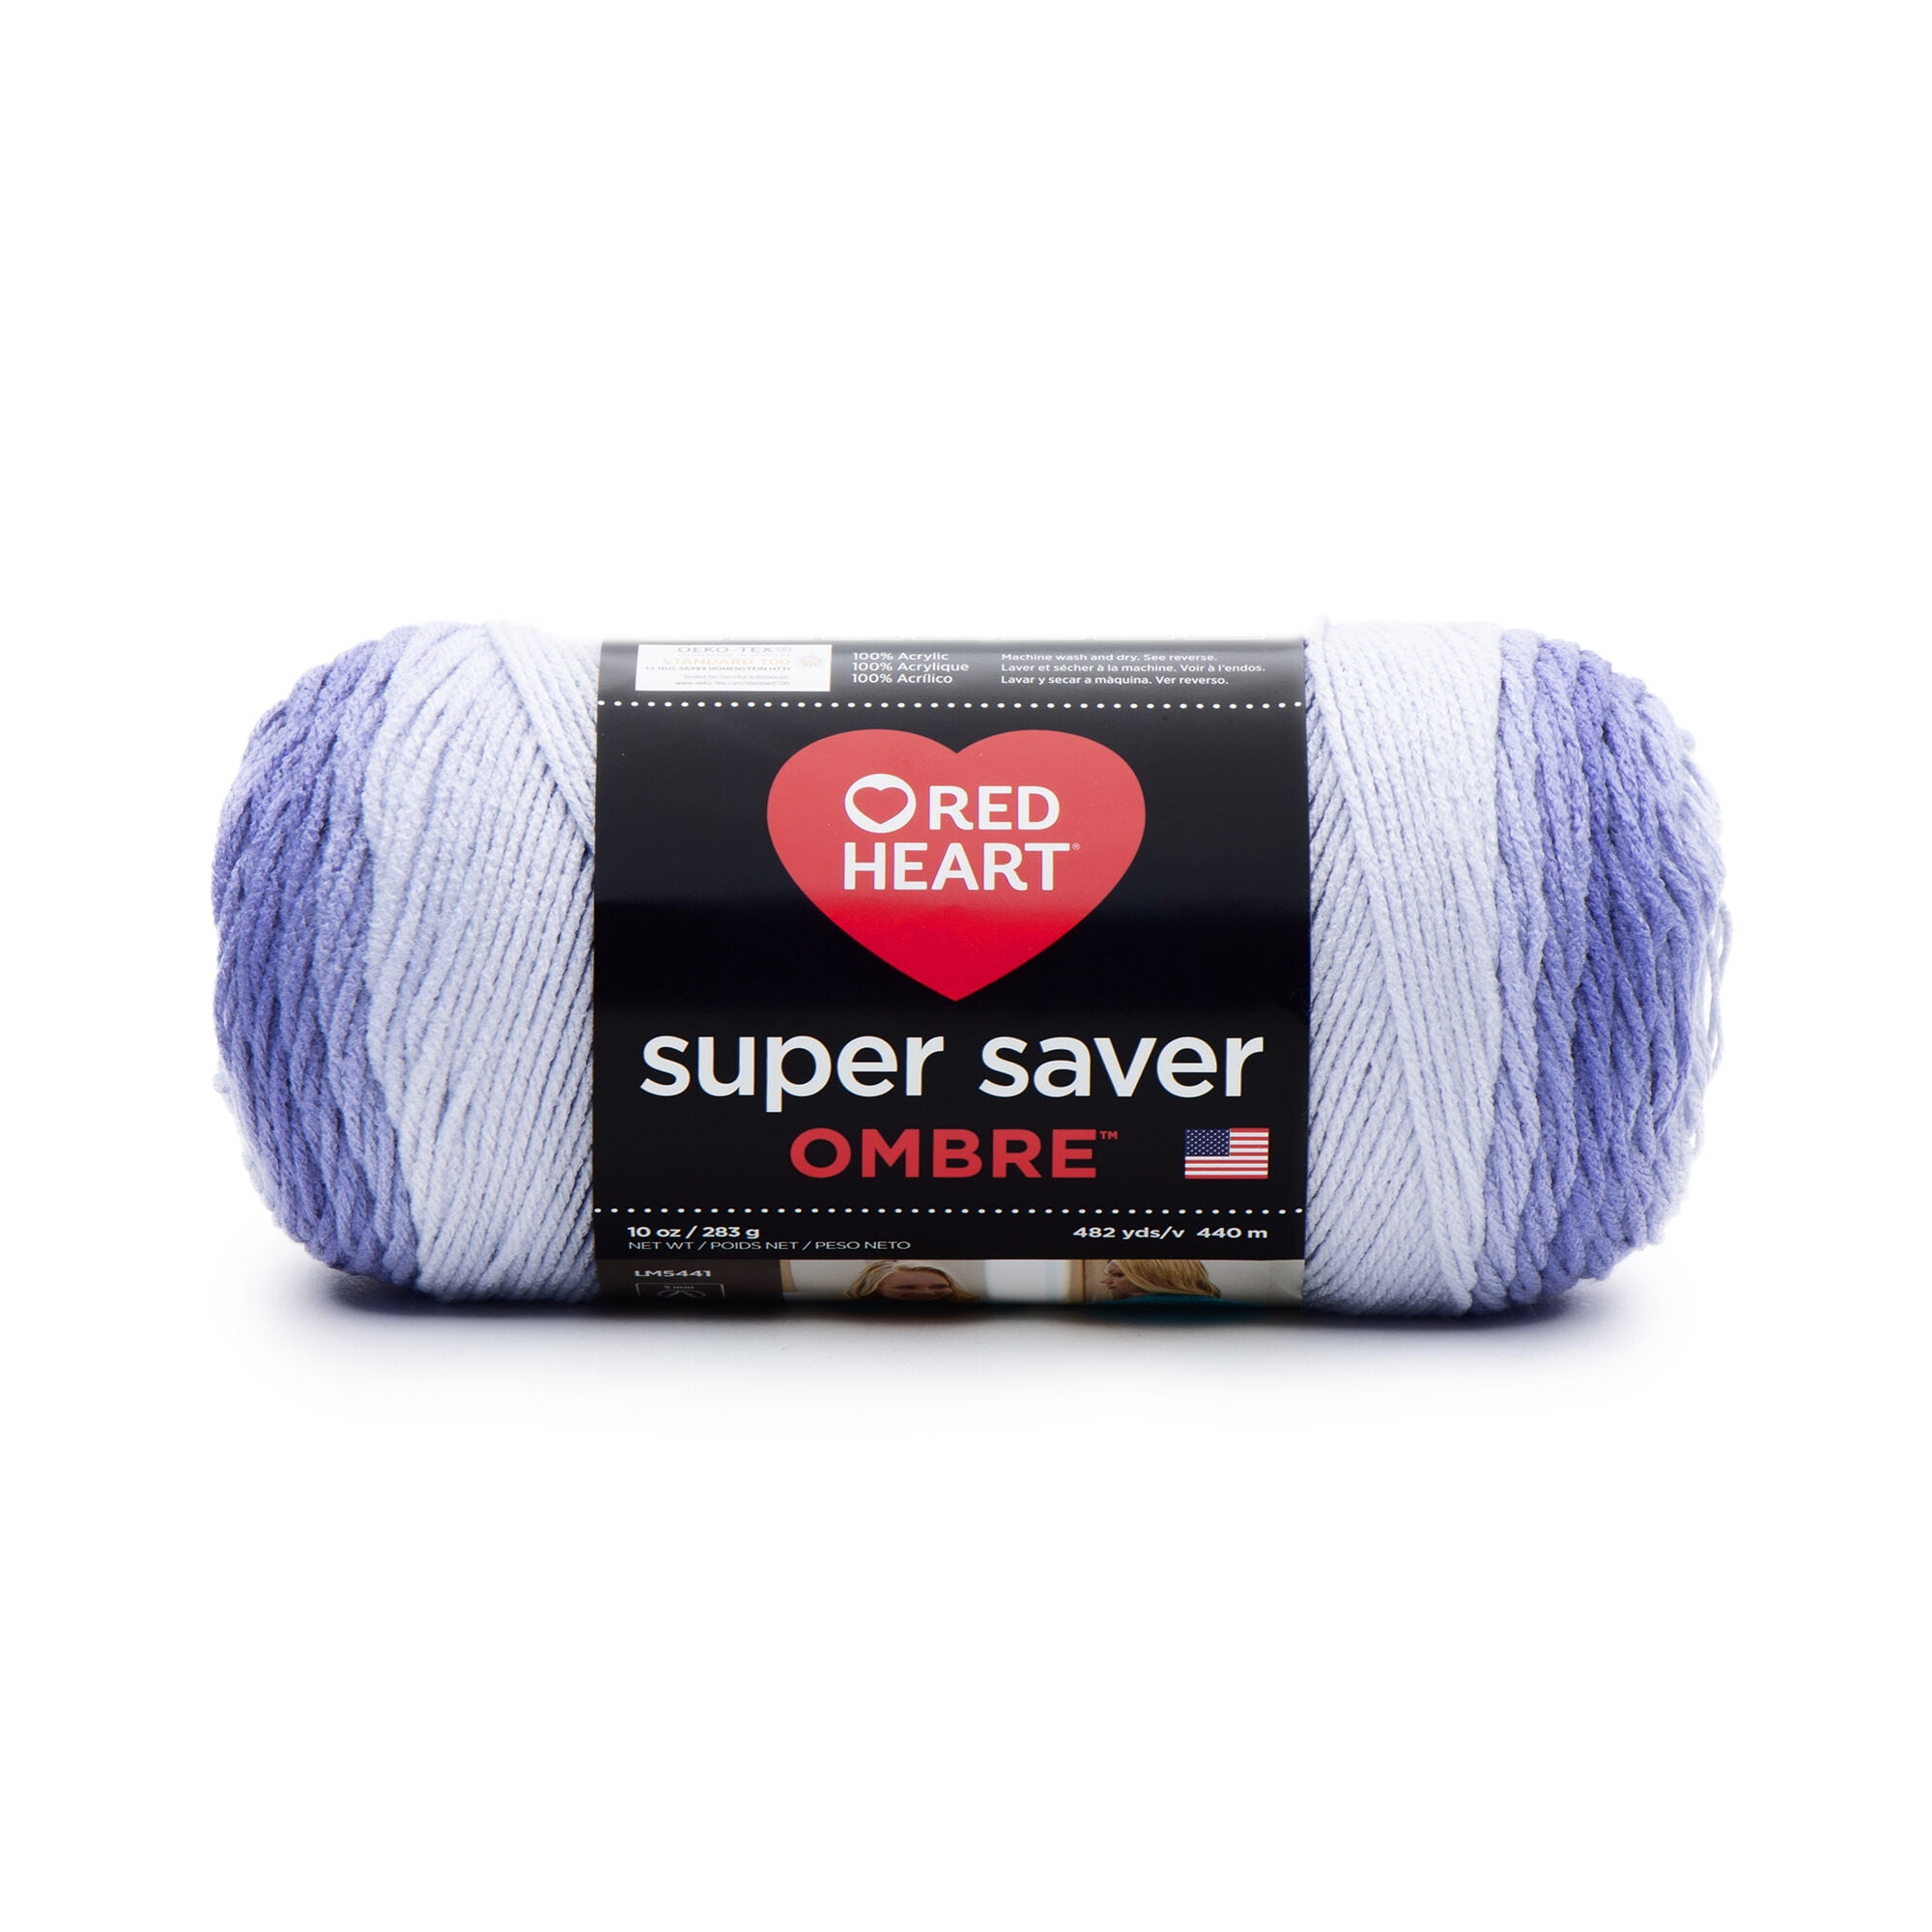 Red Heart Baja Blue Super Saver Ombre Yarn